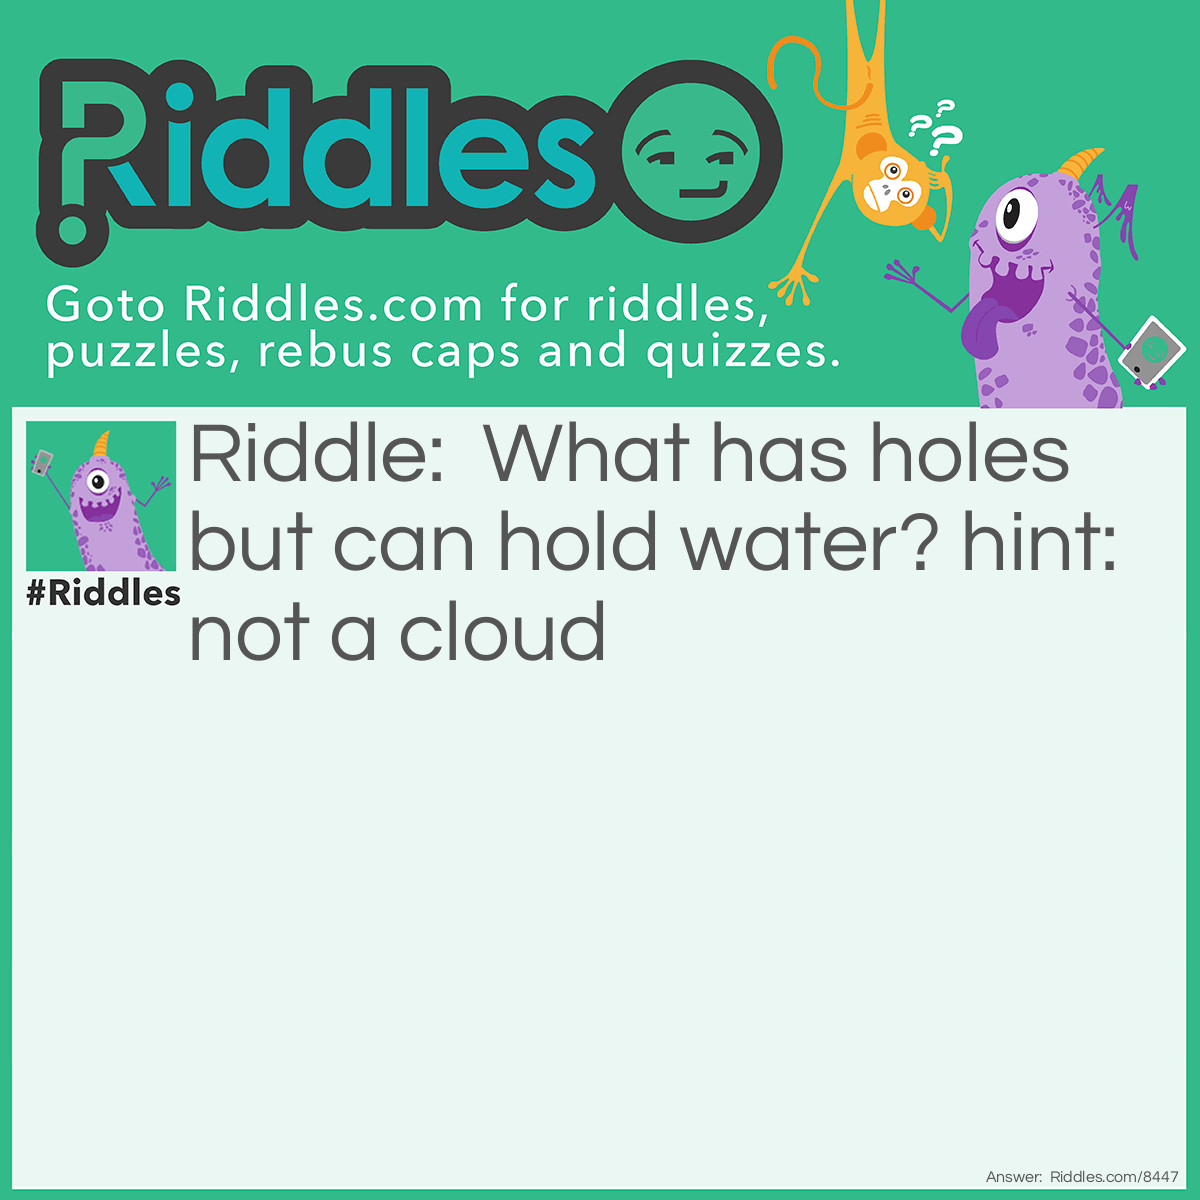 Riddle: What has holes but can hold water? hint: not a cloud Answer: Sponge.